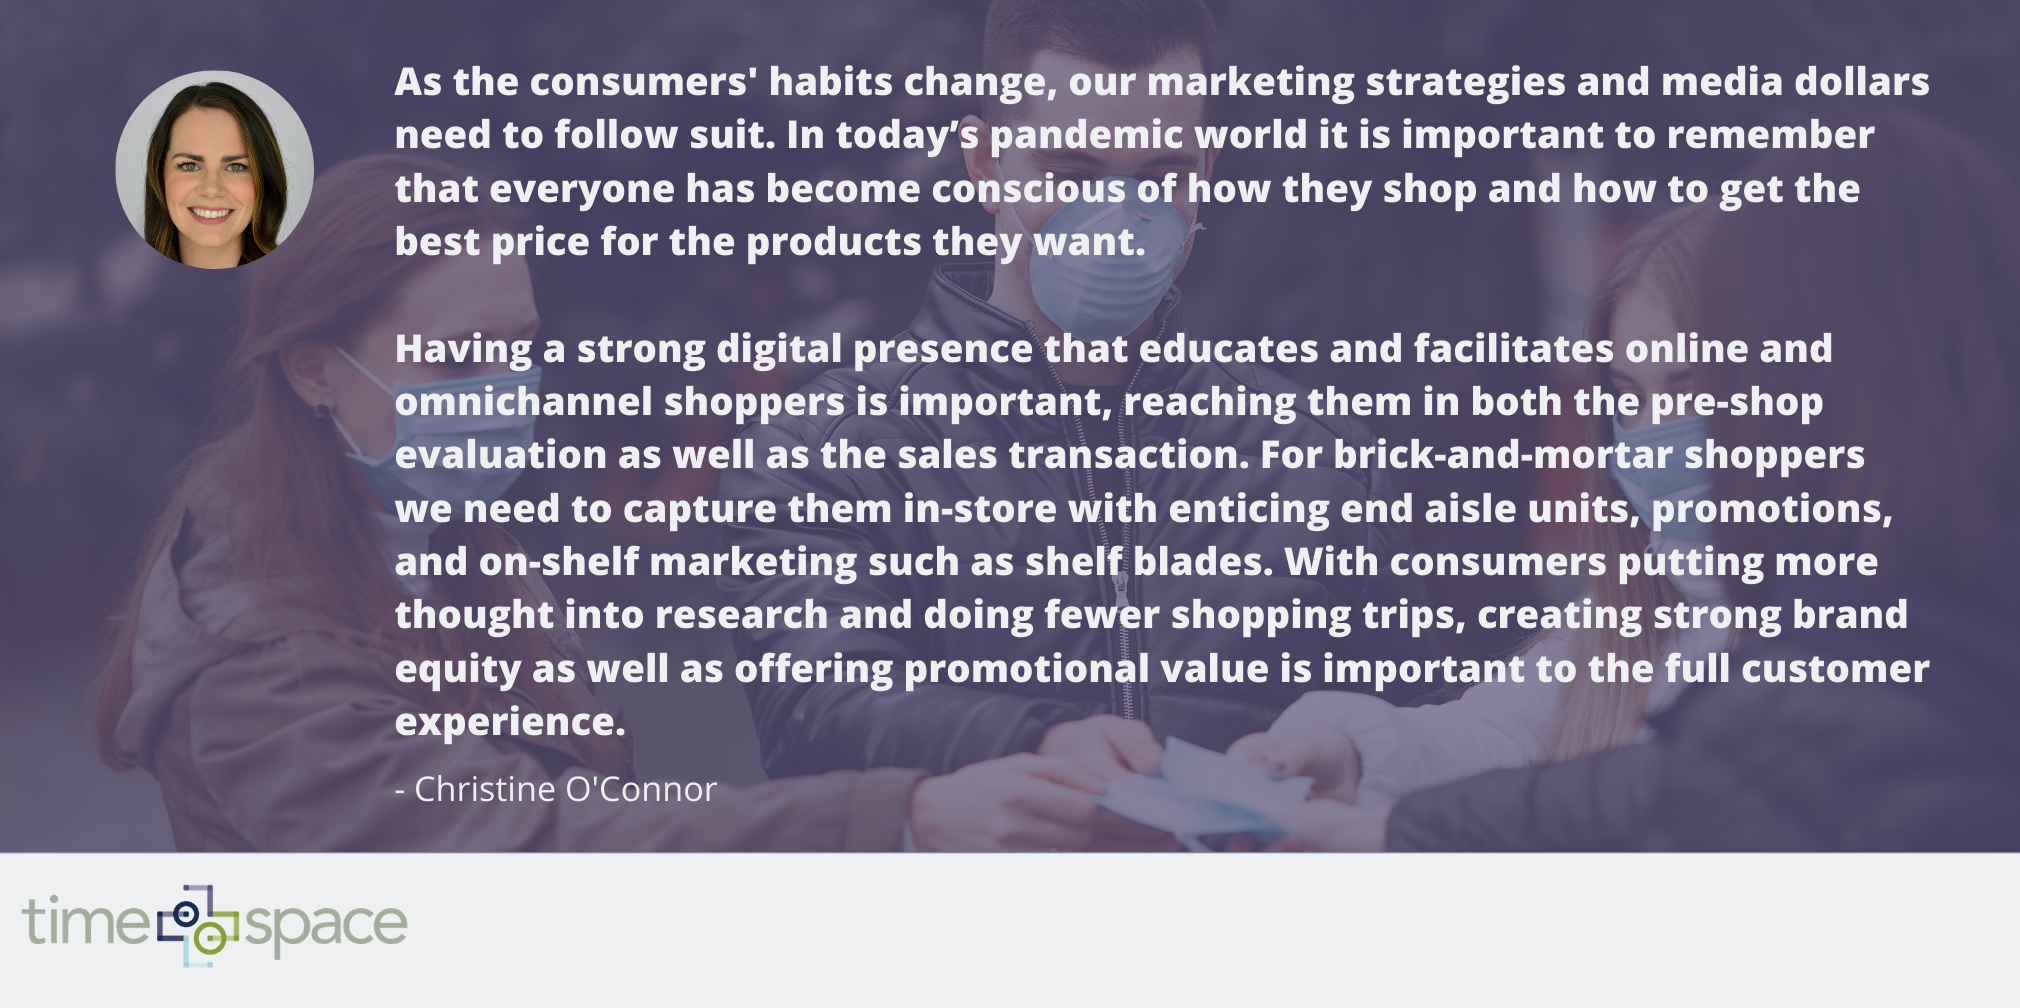 As the consumers habits change, our marketing strategies and media dollars need to follow suit. When looking at each of the types of shopper we want to show up in all phases of their decision journey with 